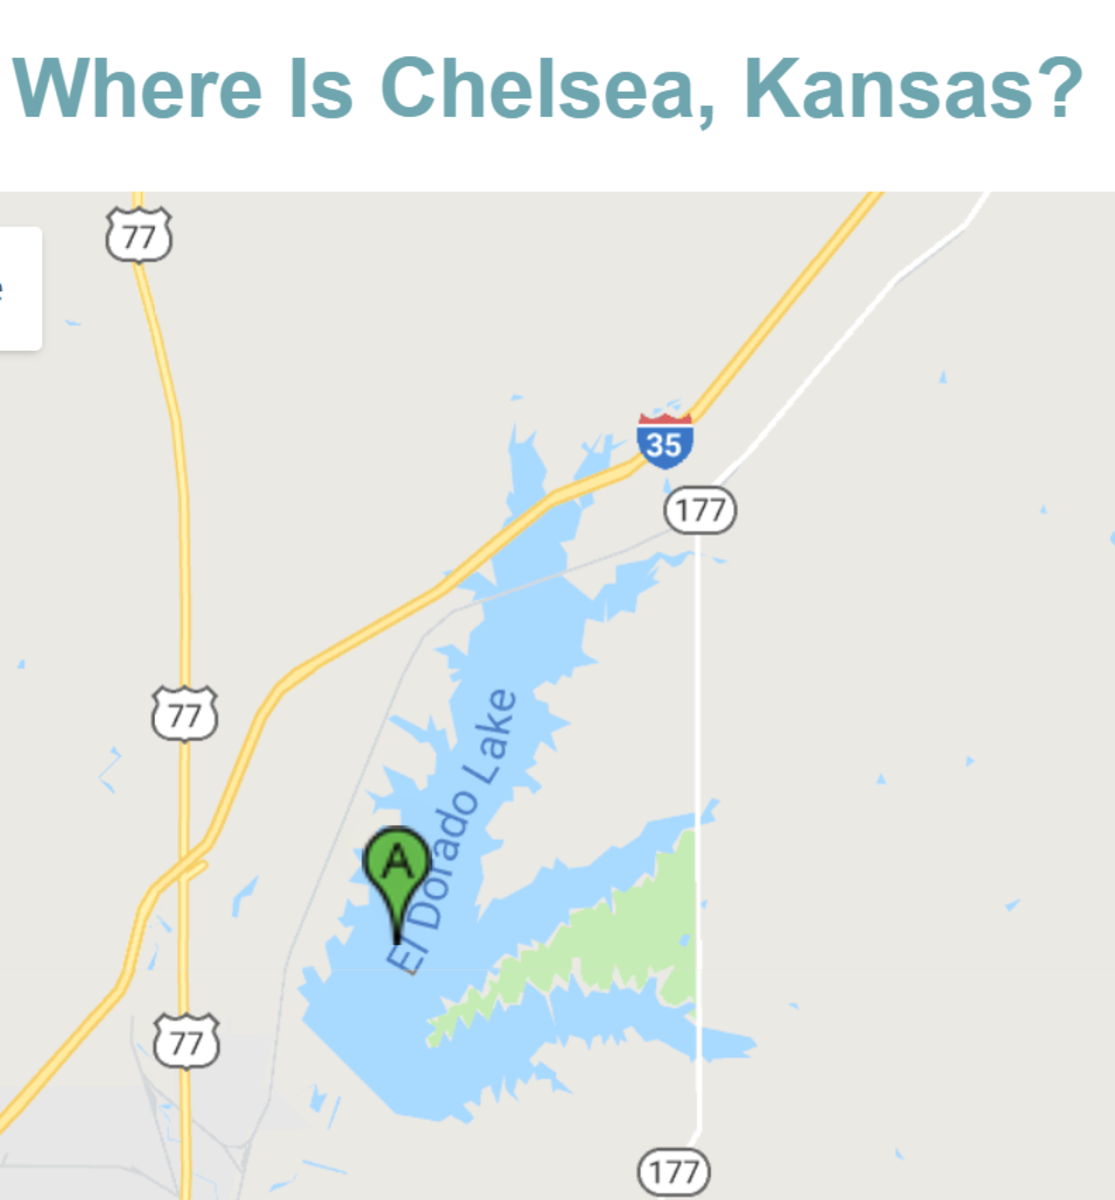 When the El Dorado Lake was expanded in central Kansas, the town of Chelsea was flooded and is no longer visible.